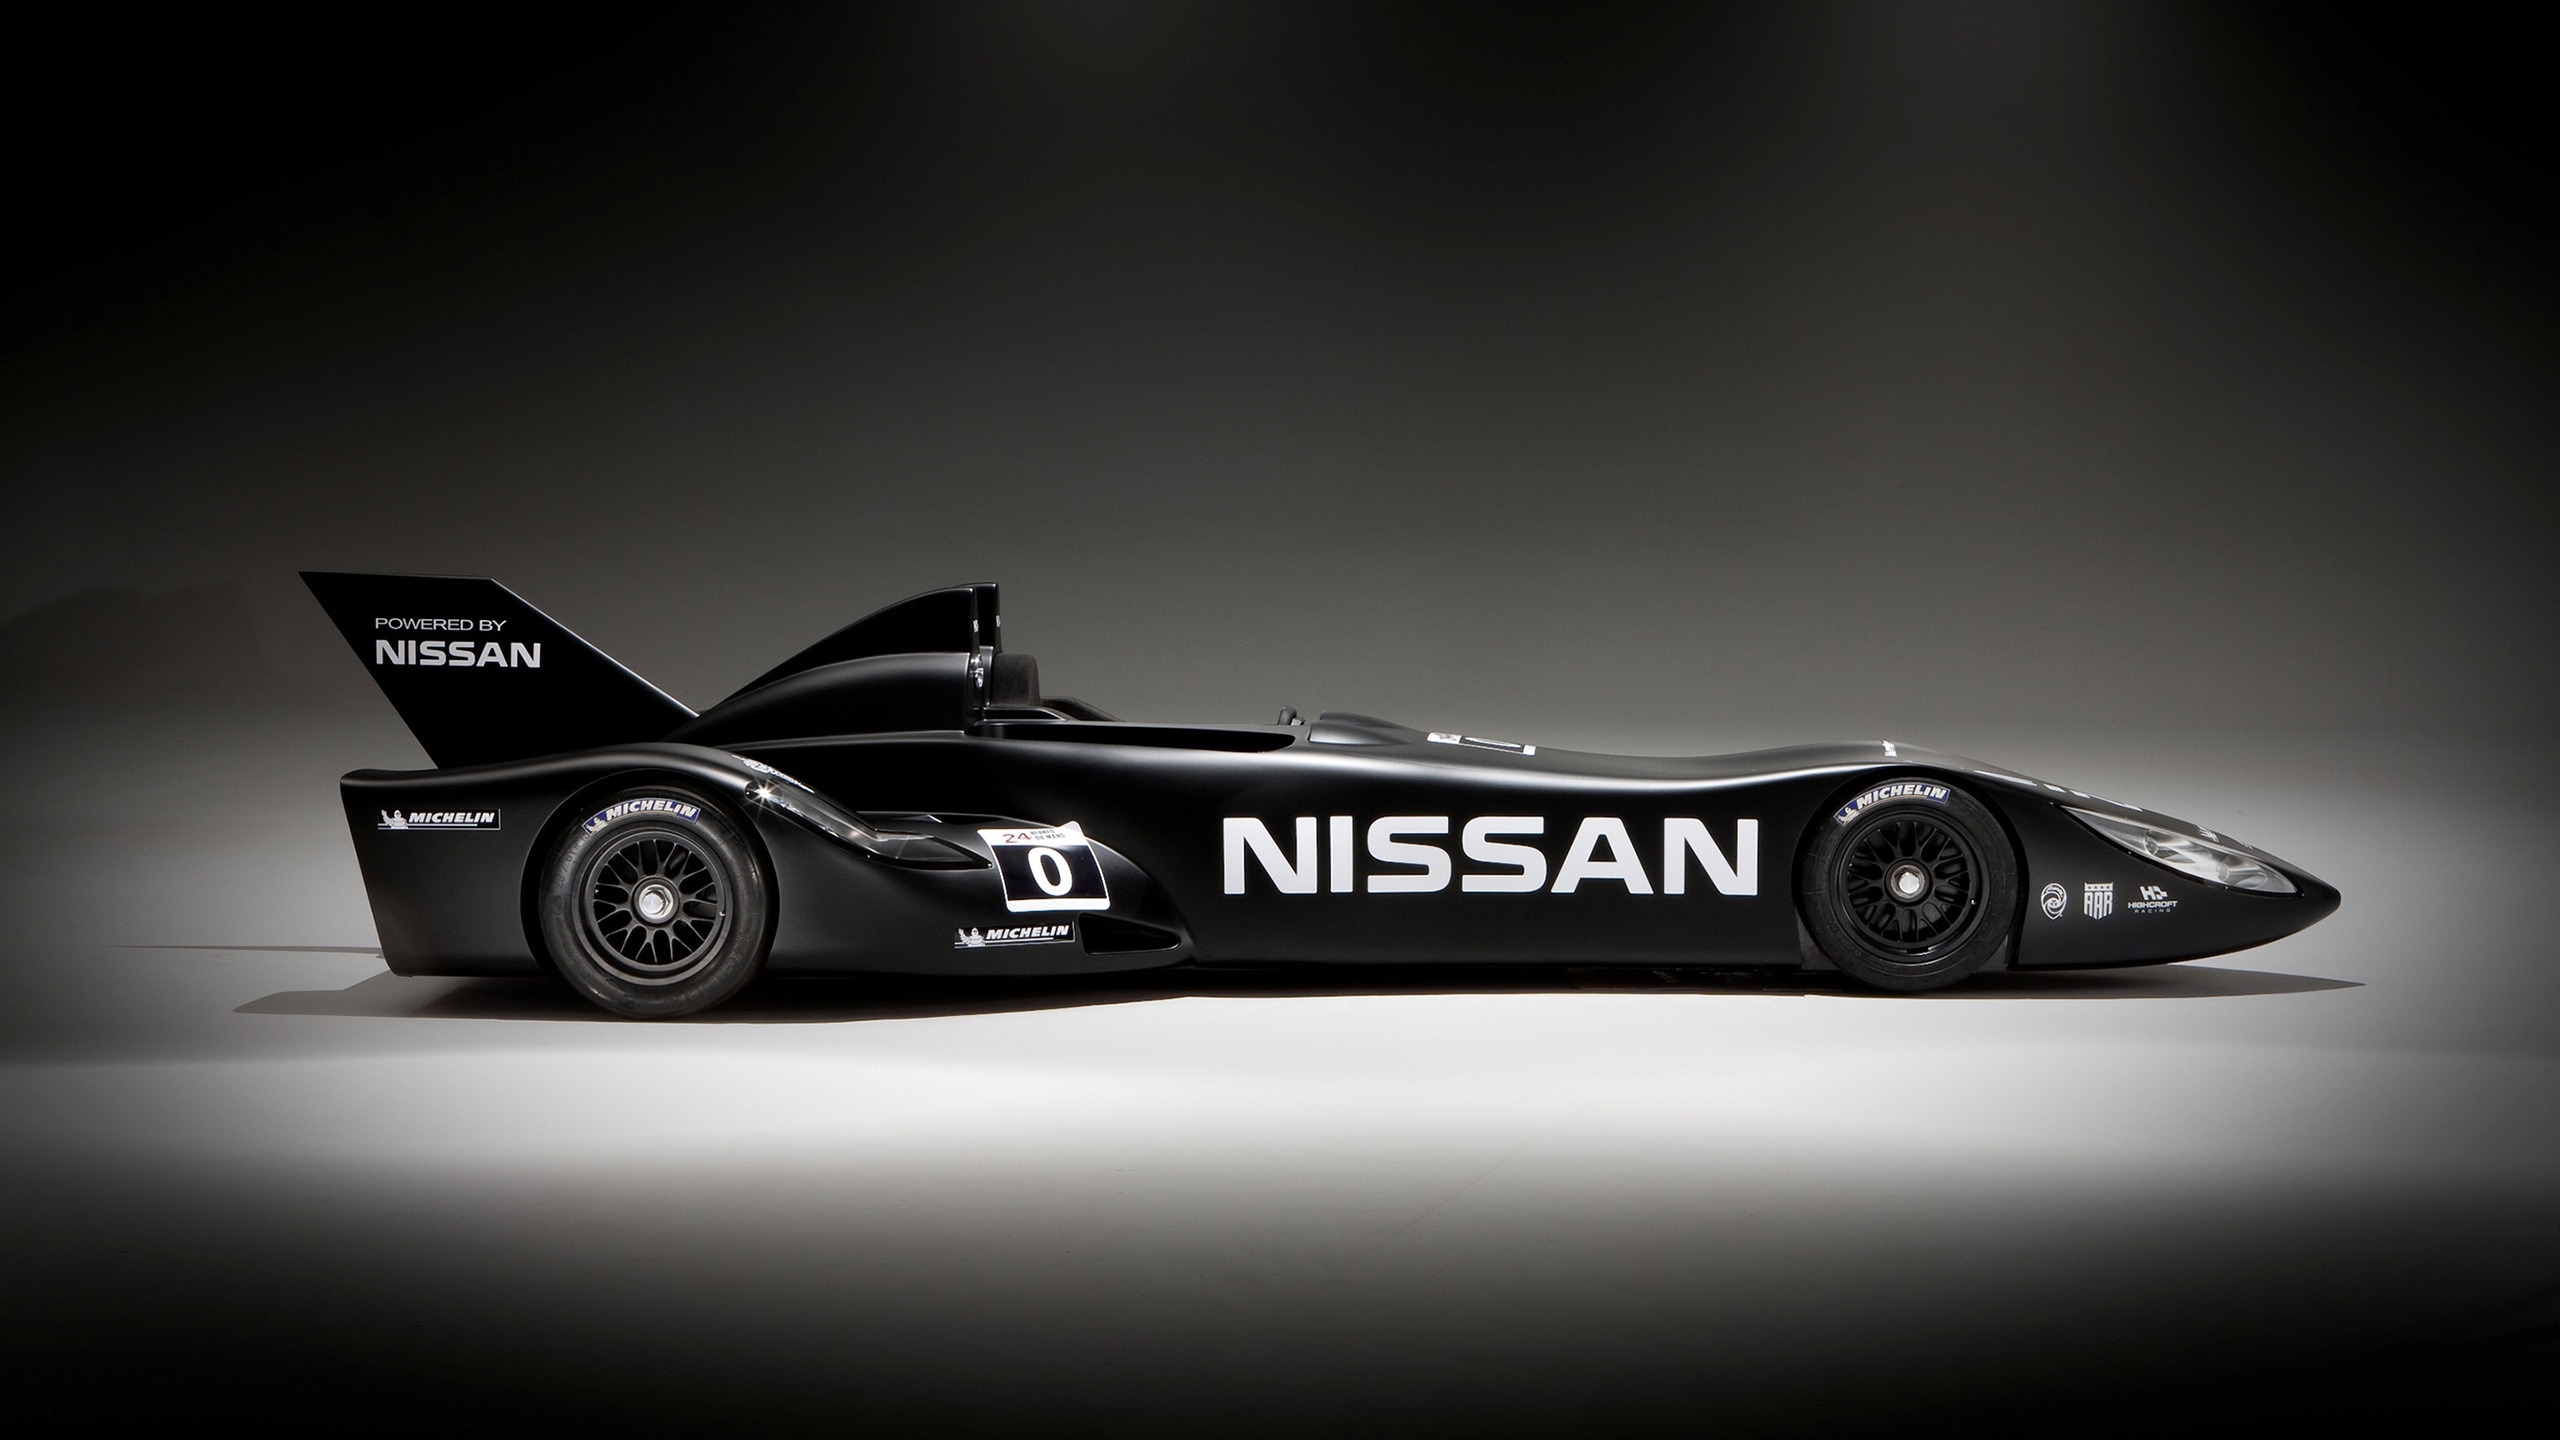 Nissan Deltawing for 2560x1440 HDTV resolution